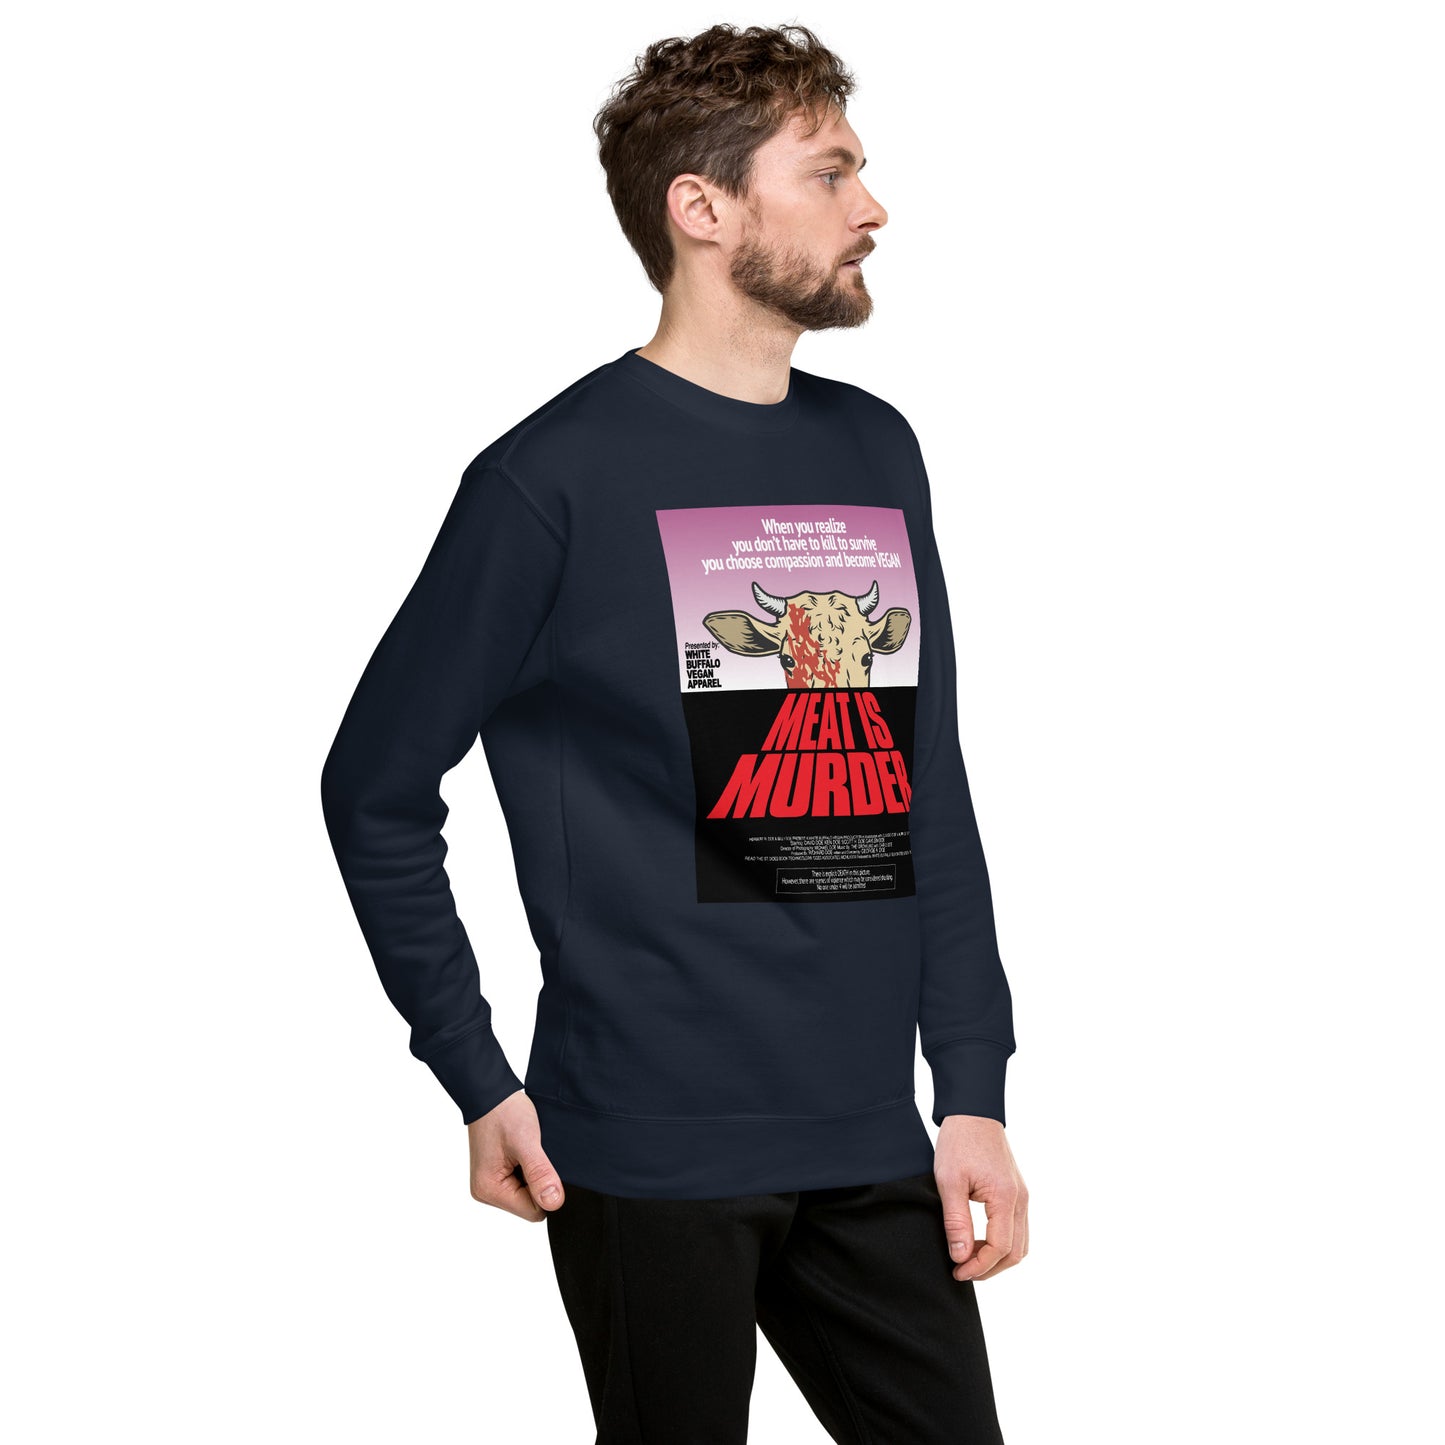 Sweater Navy Meat is Murder inspired by Dawn of the Dead poster created by White Buffalo Vegan Apparel